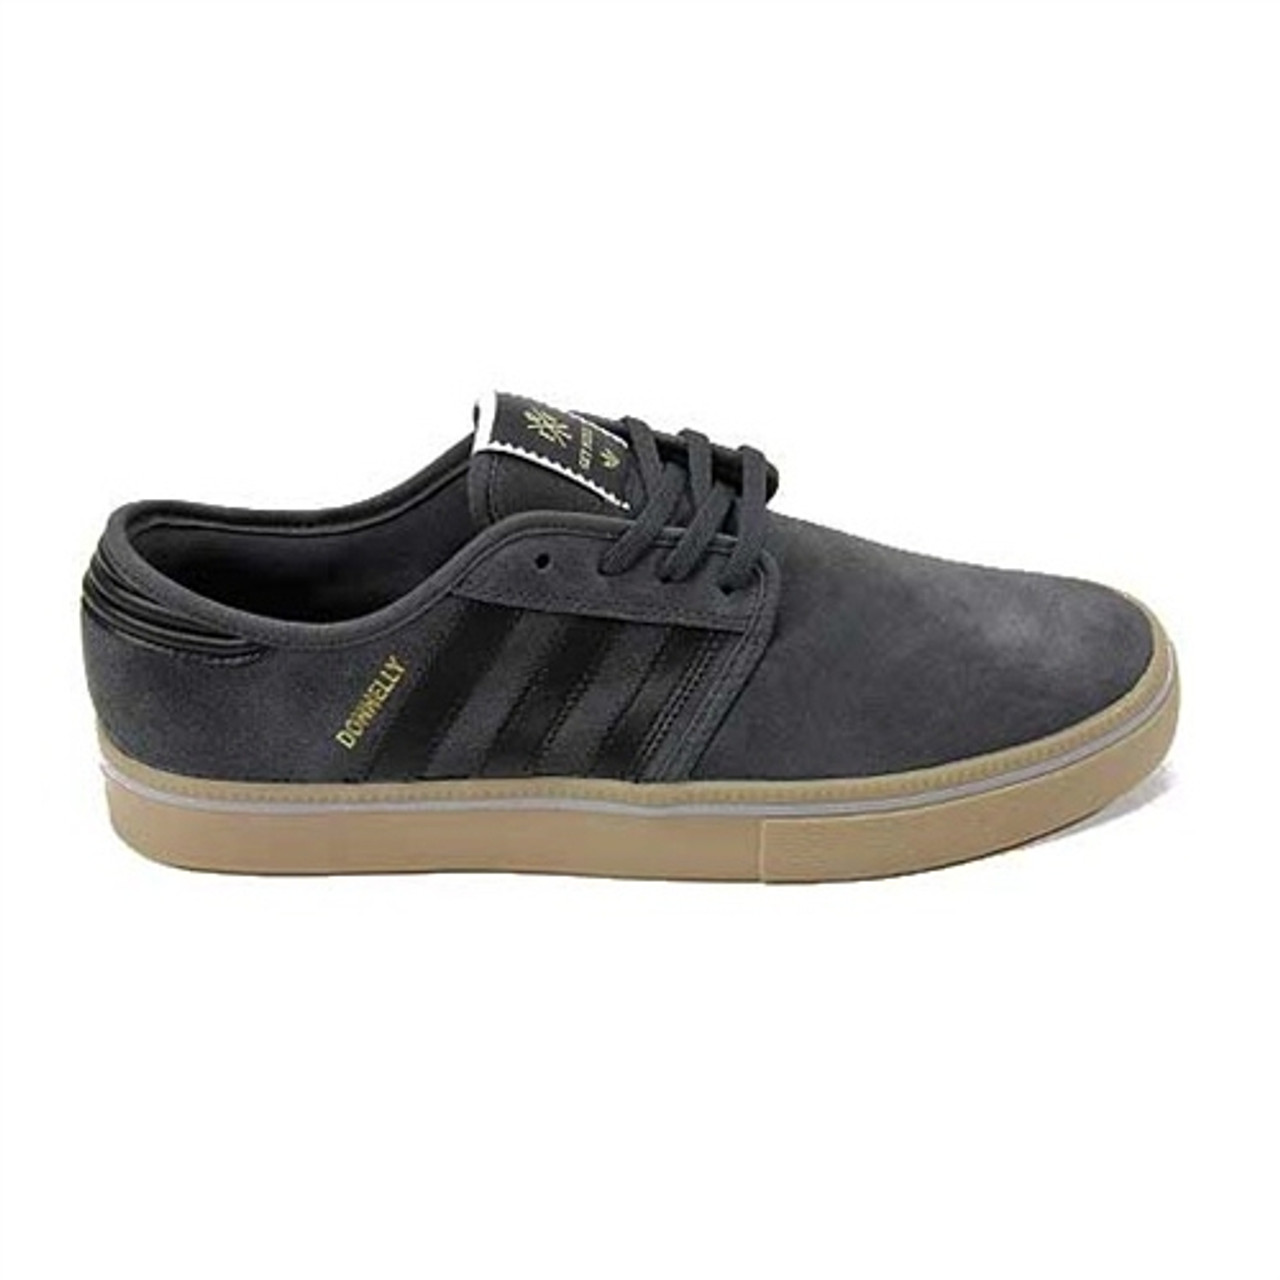 repetir capa curva Adidas Seeley Pro Jake Donnelly Real Colab Skate Shoes Grey Black Gum |  Boardparadise.com